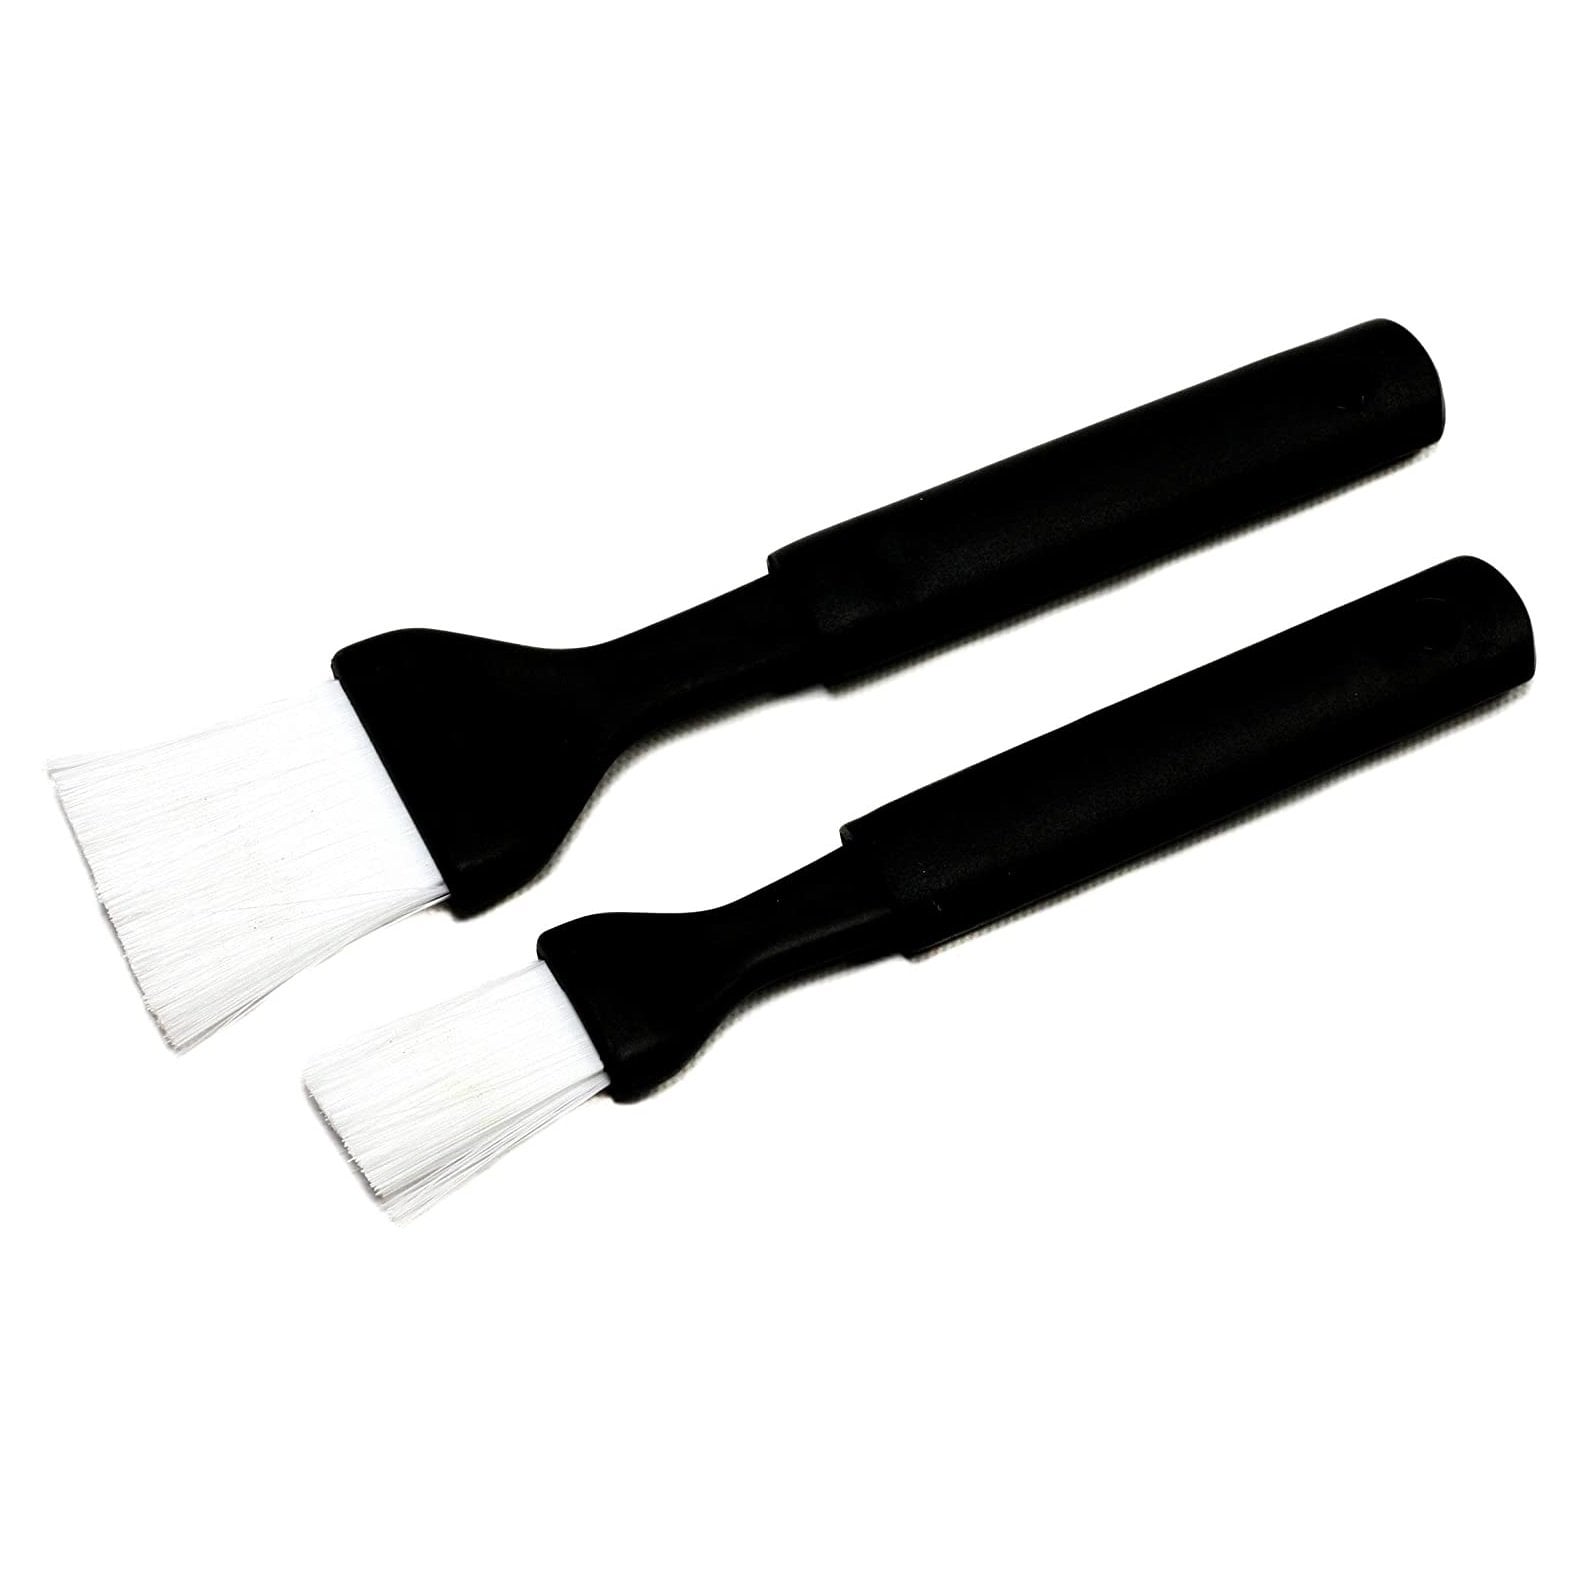 https://ak1.ostkcdn.com/images/products/is/images/direct/a23faad8f8c05968cbeb71f4d9eac48f0cf4b1c8/Chef-Craft-2pc-Basting-Brush-Set---Great-for-BBQ-Sauces-or-Pastry-Glazing.jpg